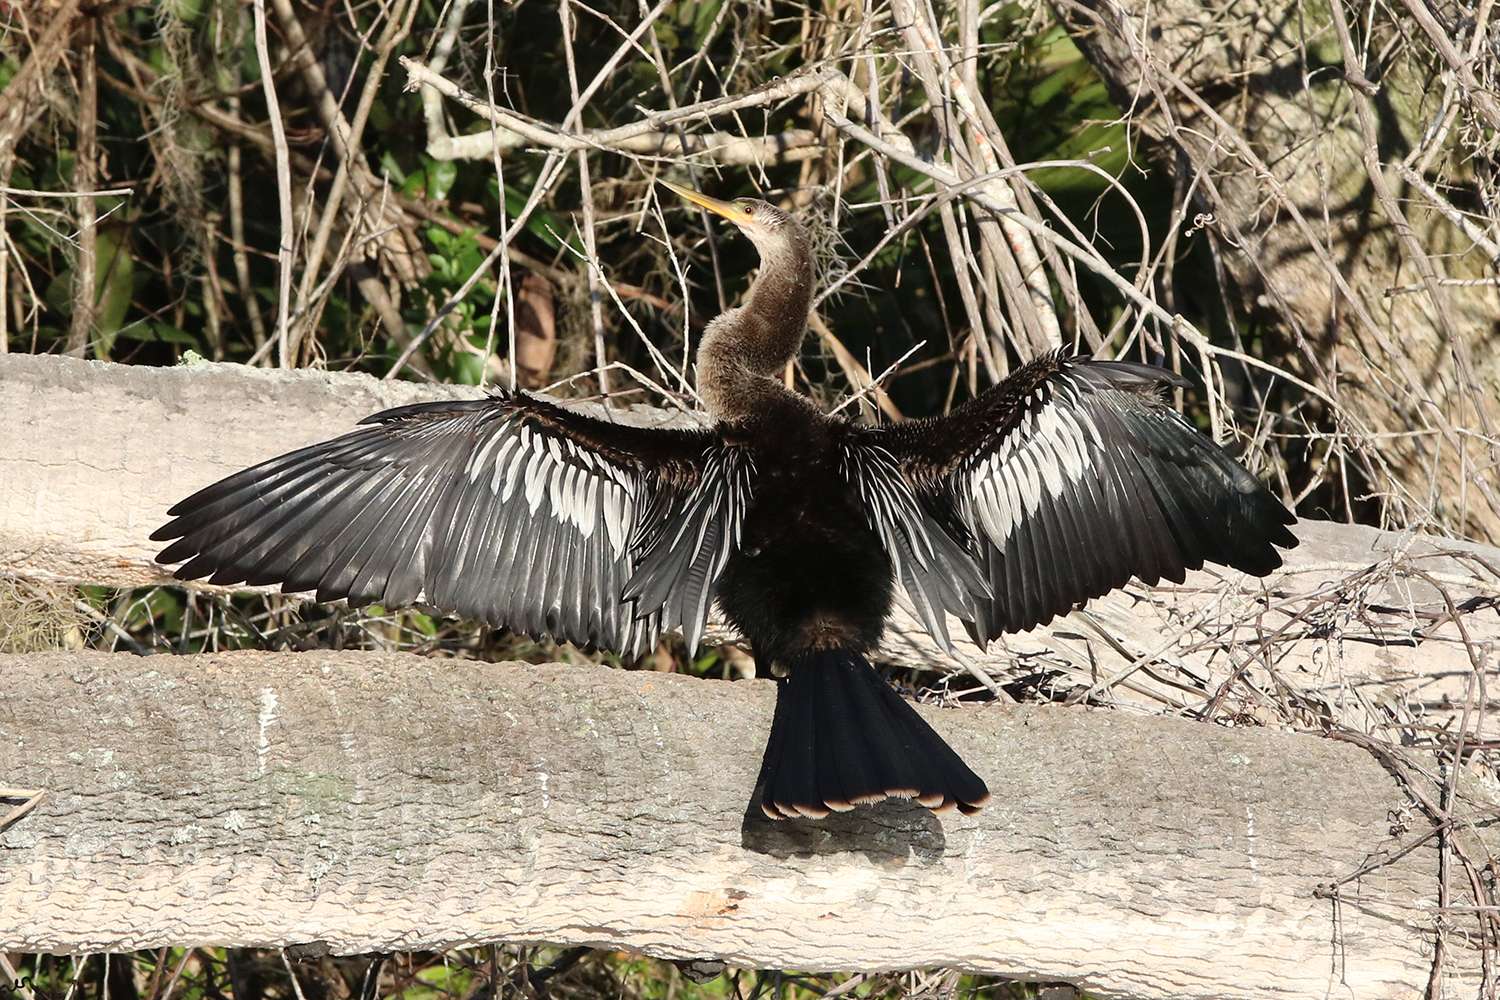 Another cormorant, St. Johns River, 2019.